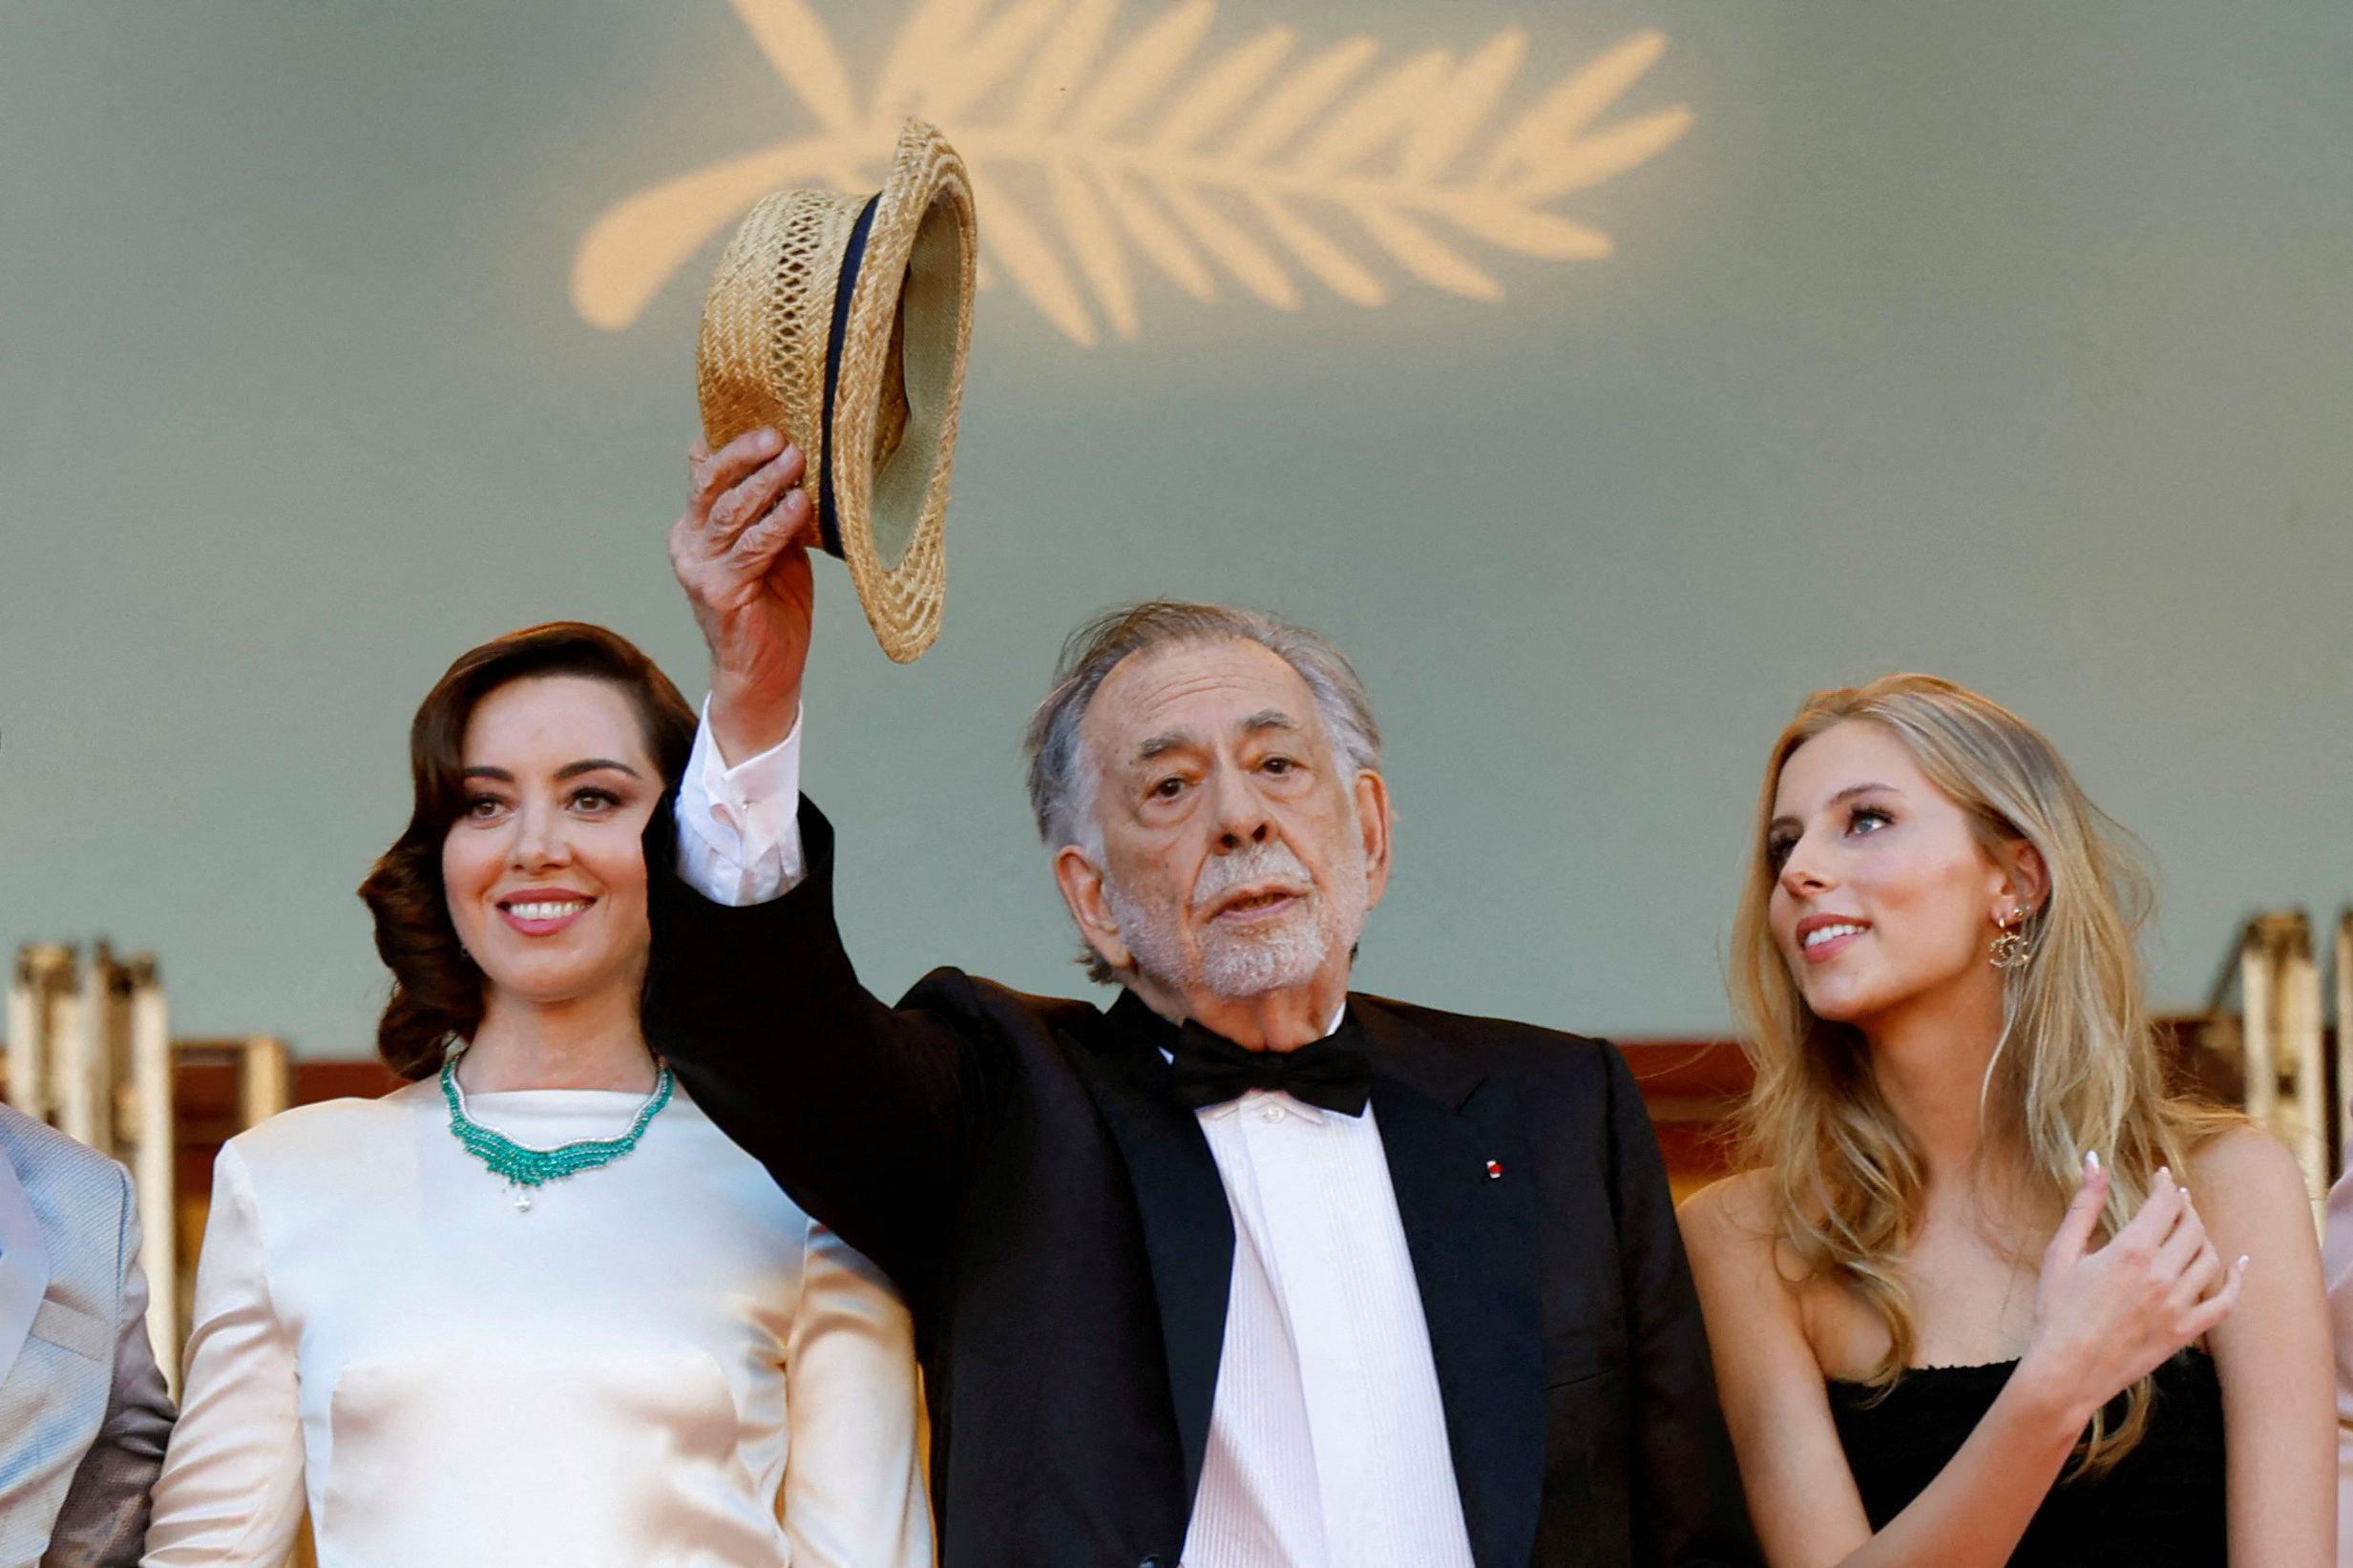 'Megalopolis', Francis Ford Coppola's $120 million picture, premieres at Cannes. It's difficult to turn away from the epic